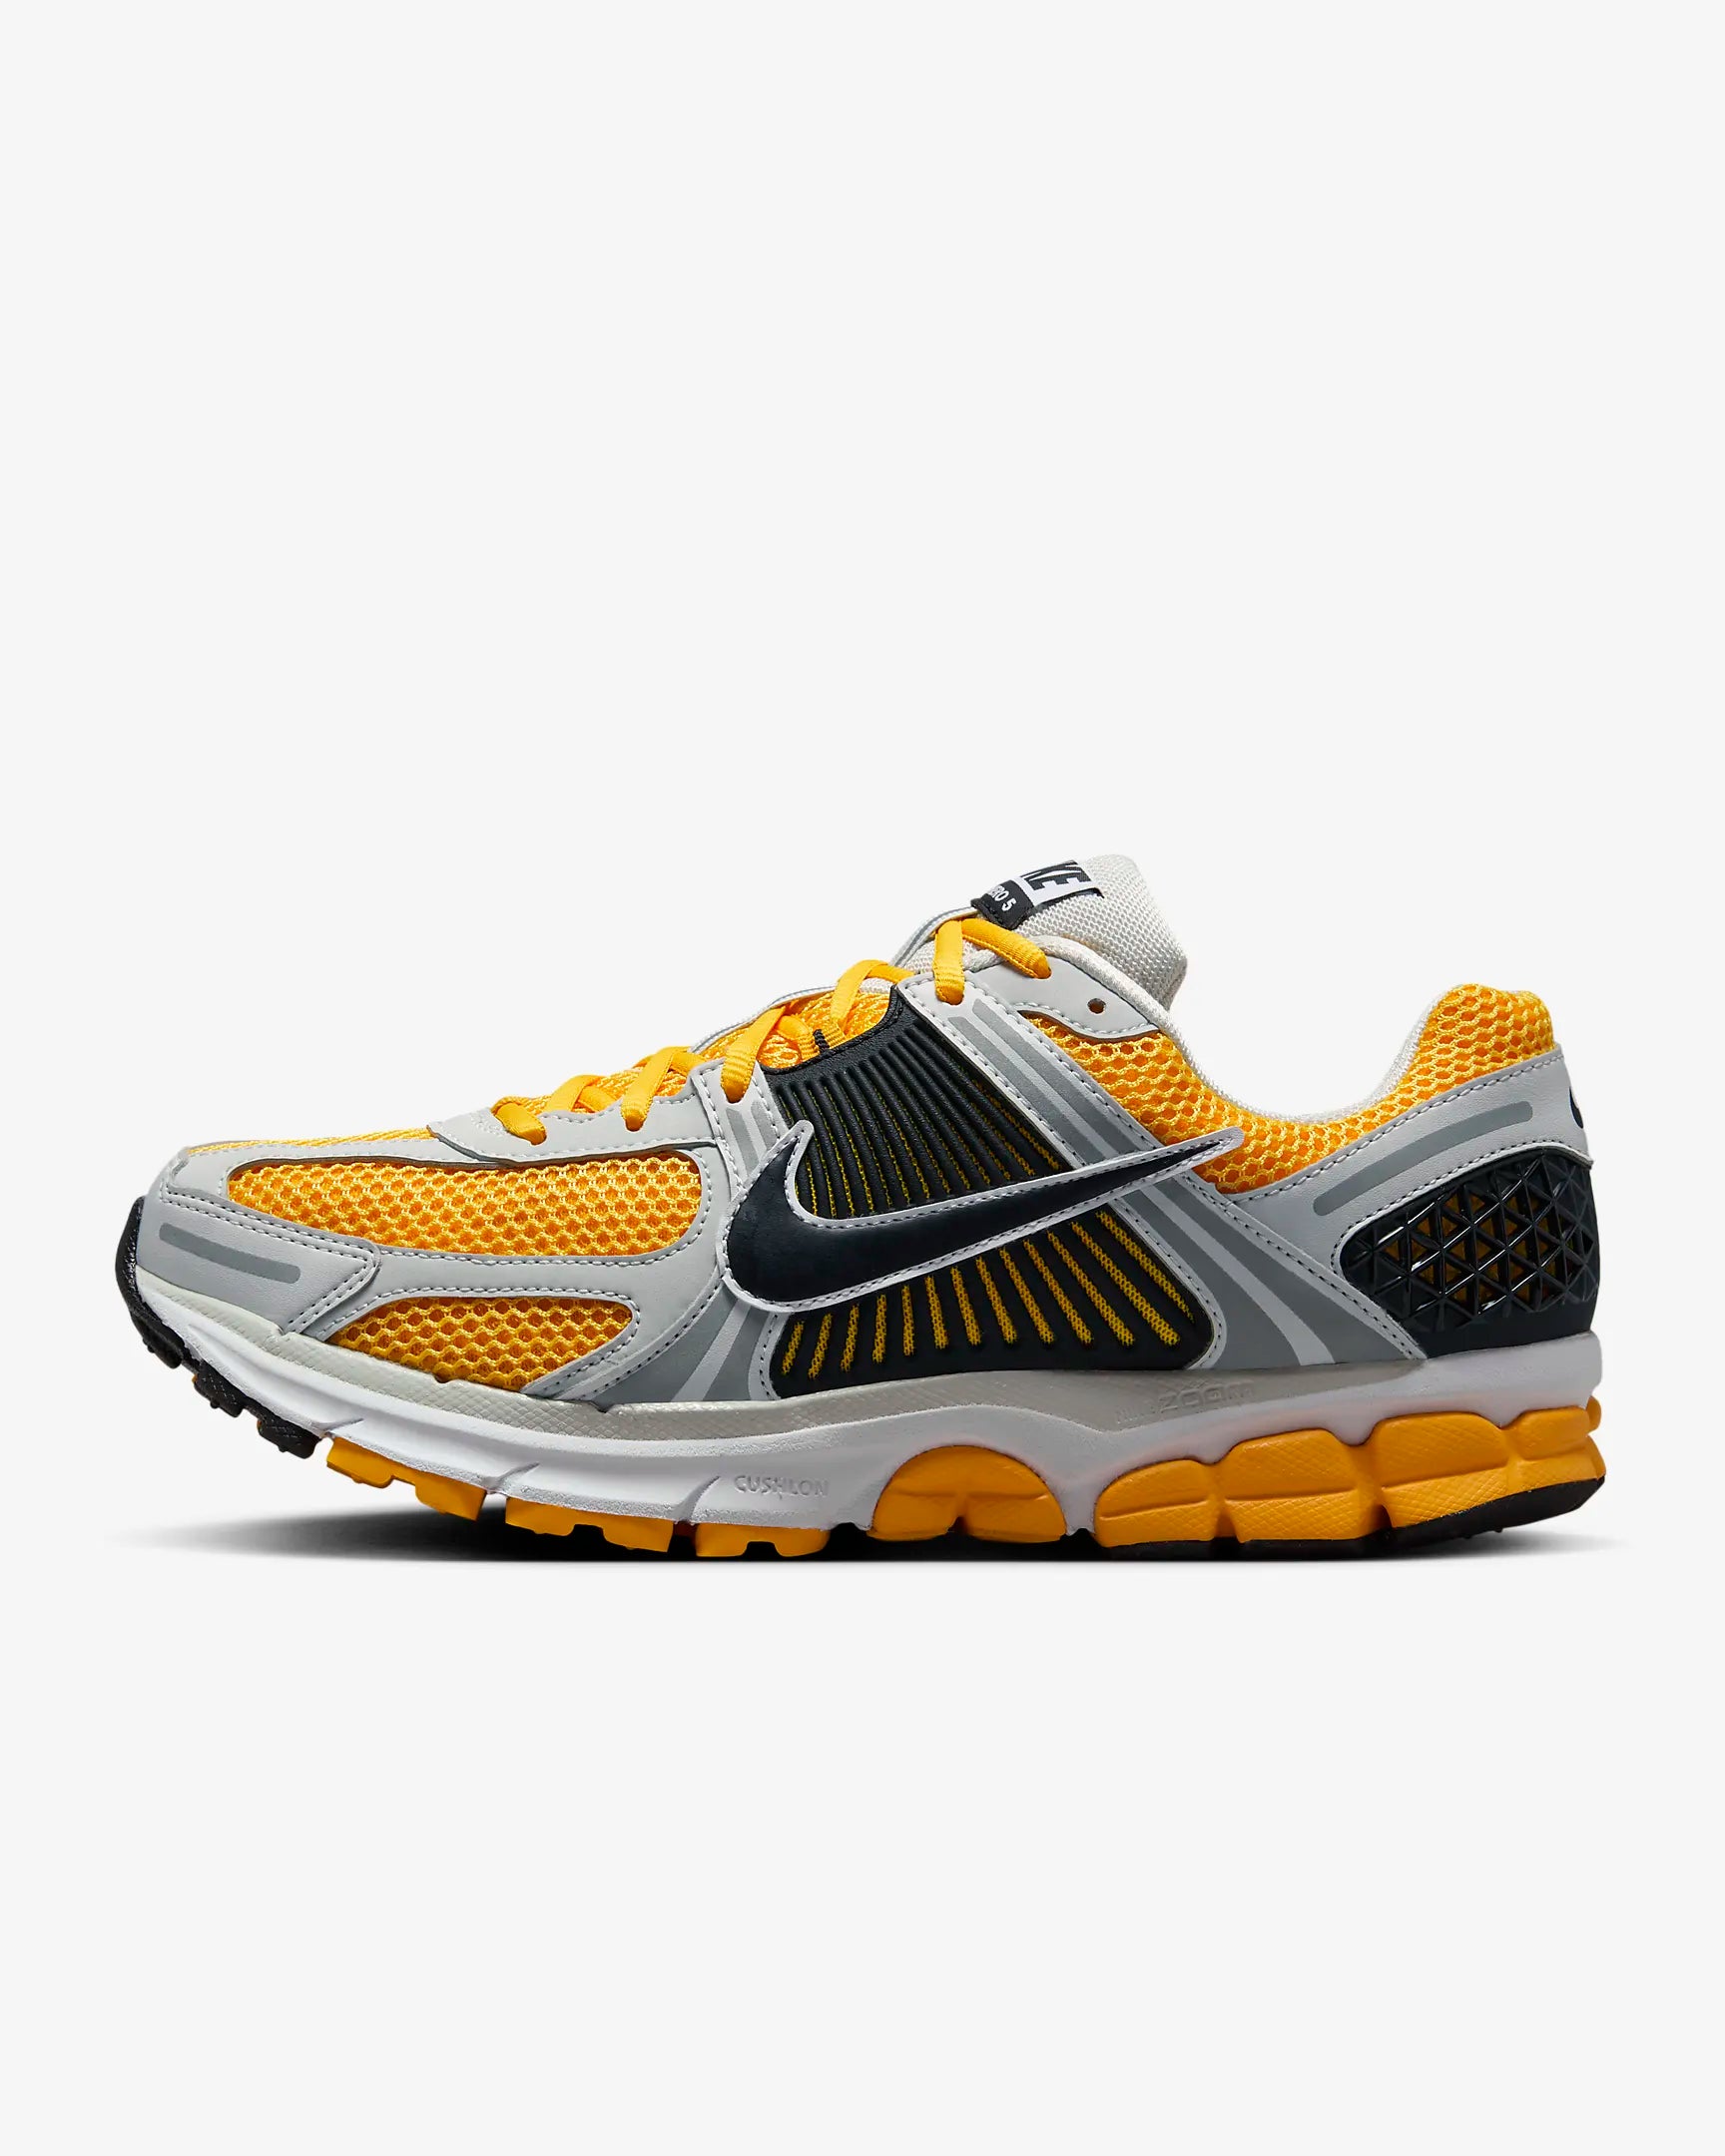 nike air falcon size 15 tires price in pakistan